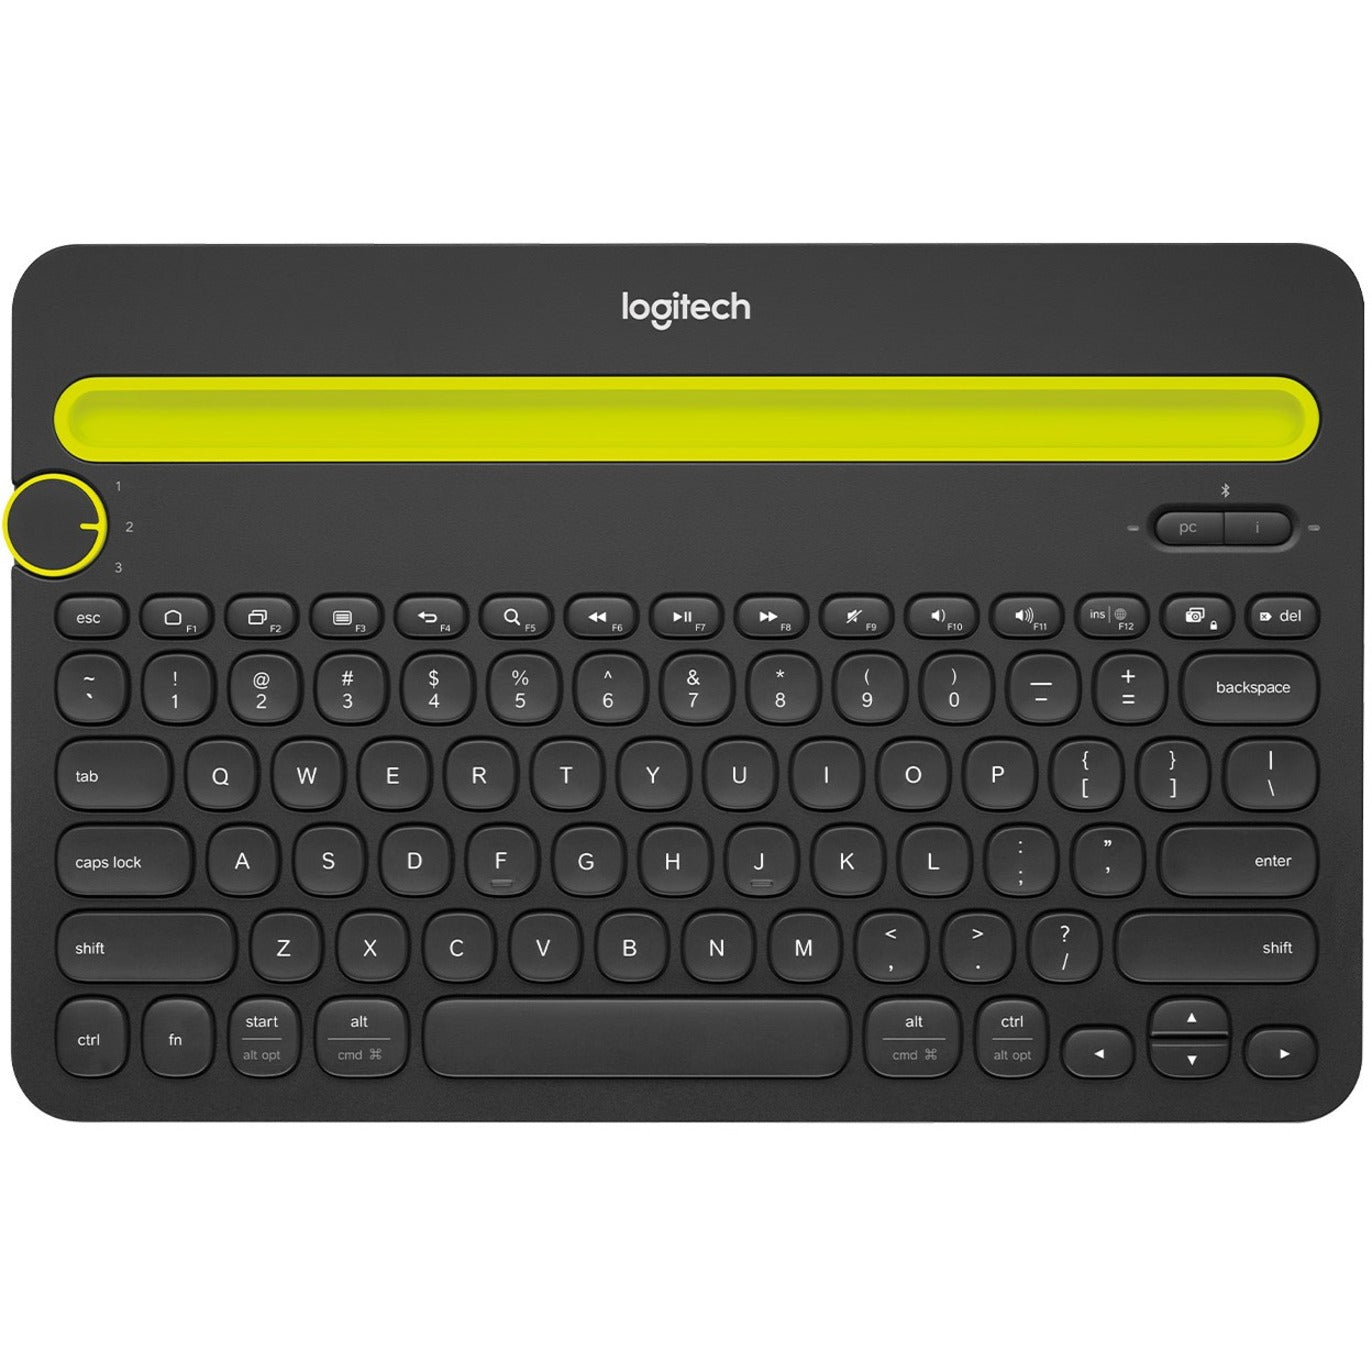 Logitech 920-006342 Bluetooth Multi-Device Keyboard K480, Wireless QWERTY Keyboard for Smartphone, Tablet, and Computer